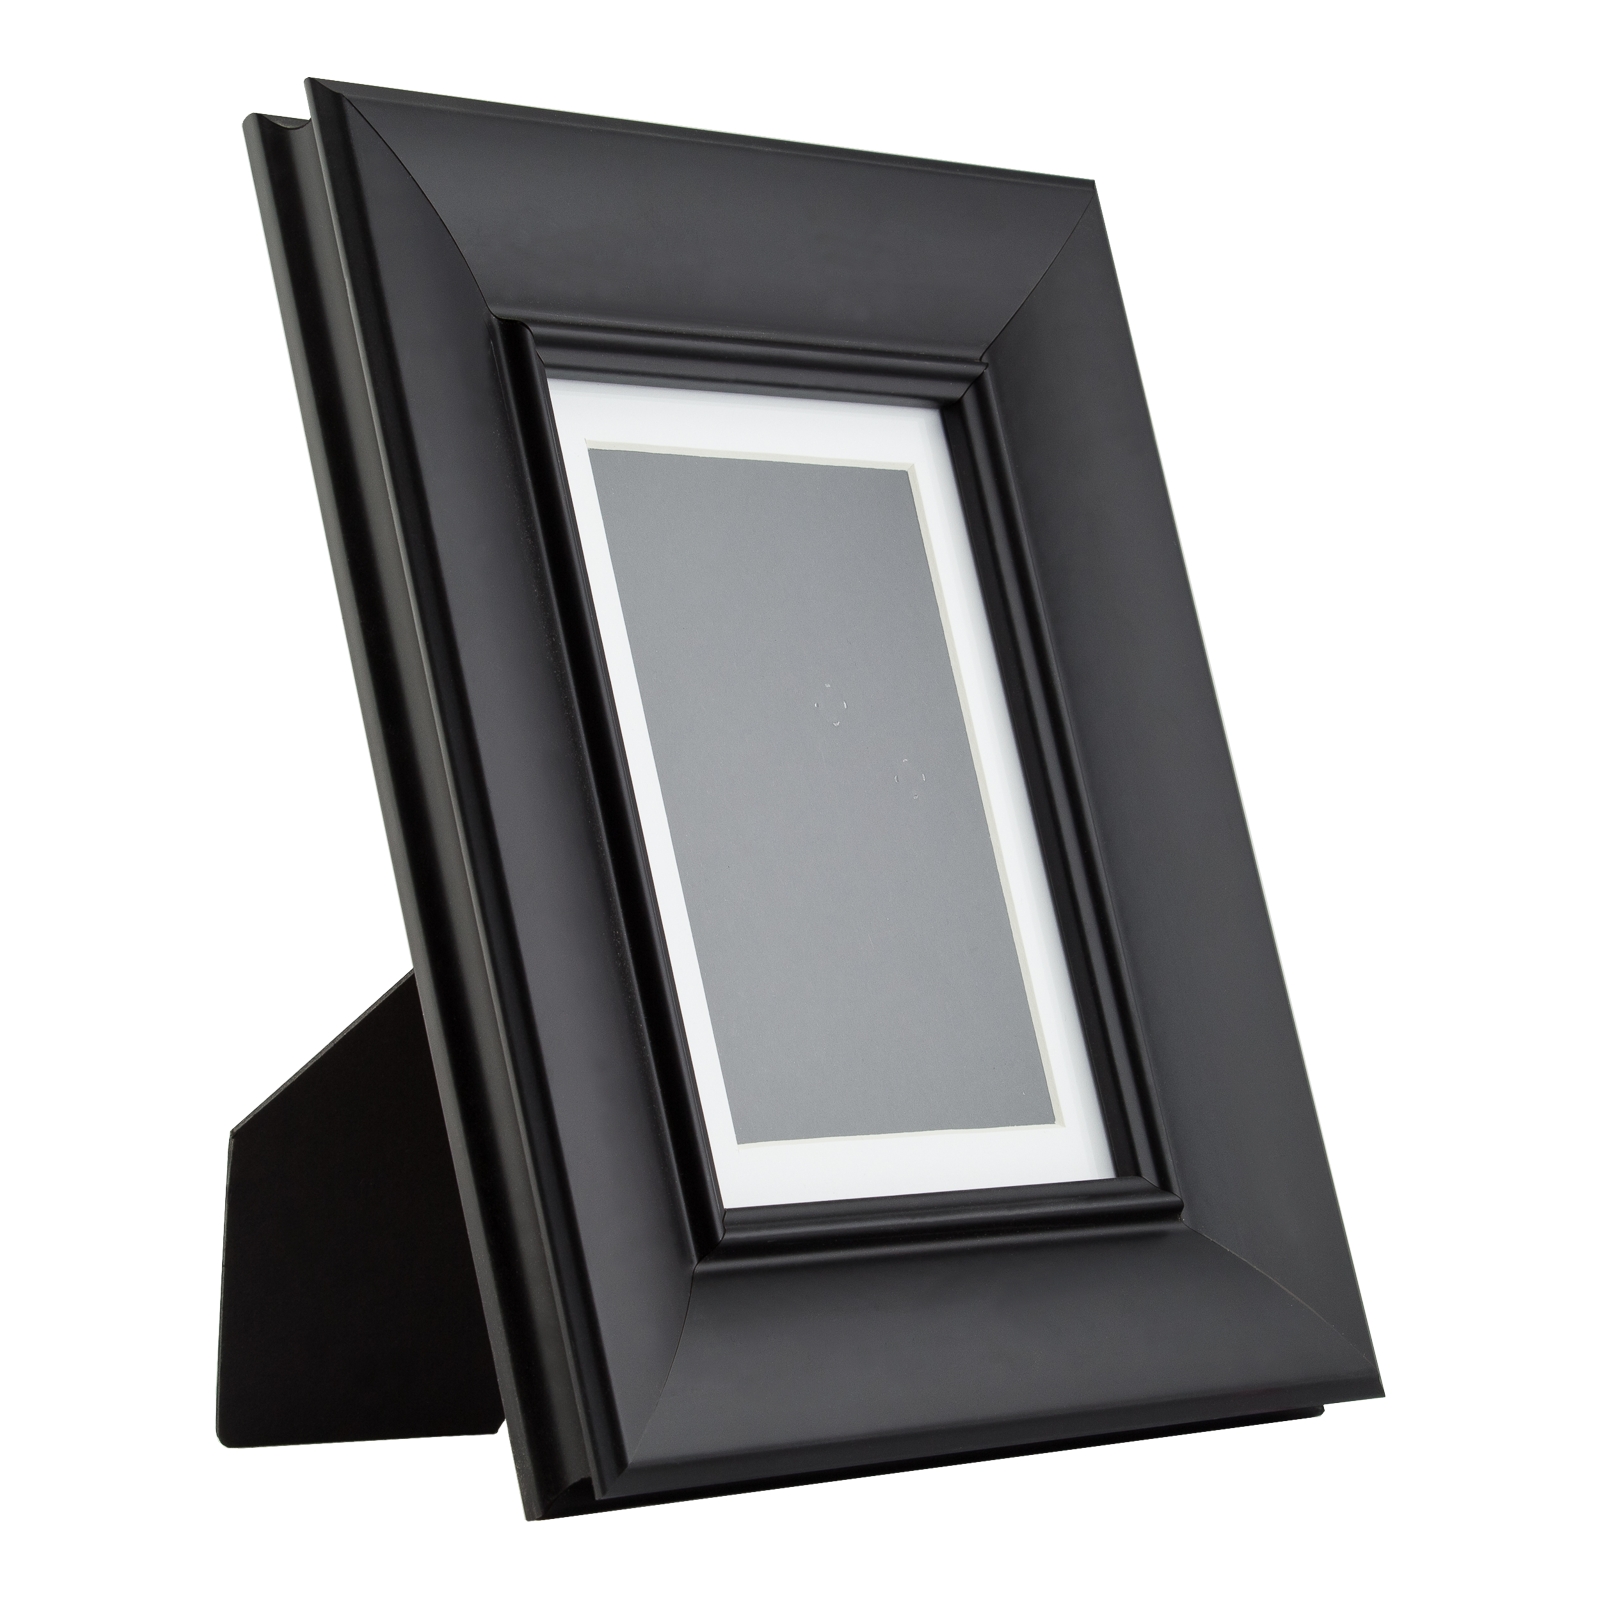 Craig Frames 1WB3BK 8.5 x 11 Inch Black Picture Frame Matted to Display a 6 x 9 Inch Photo 